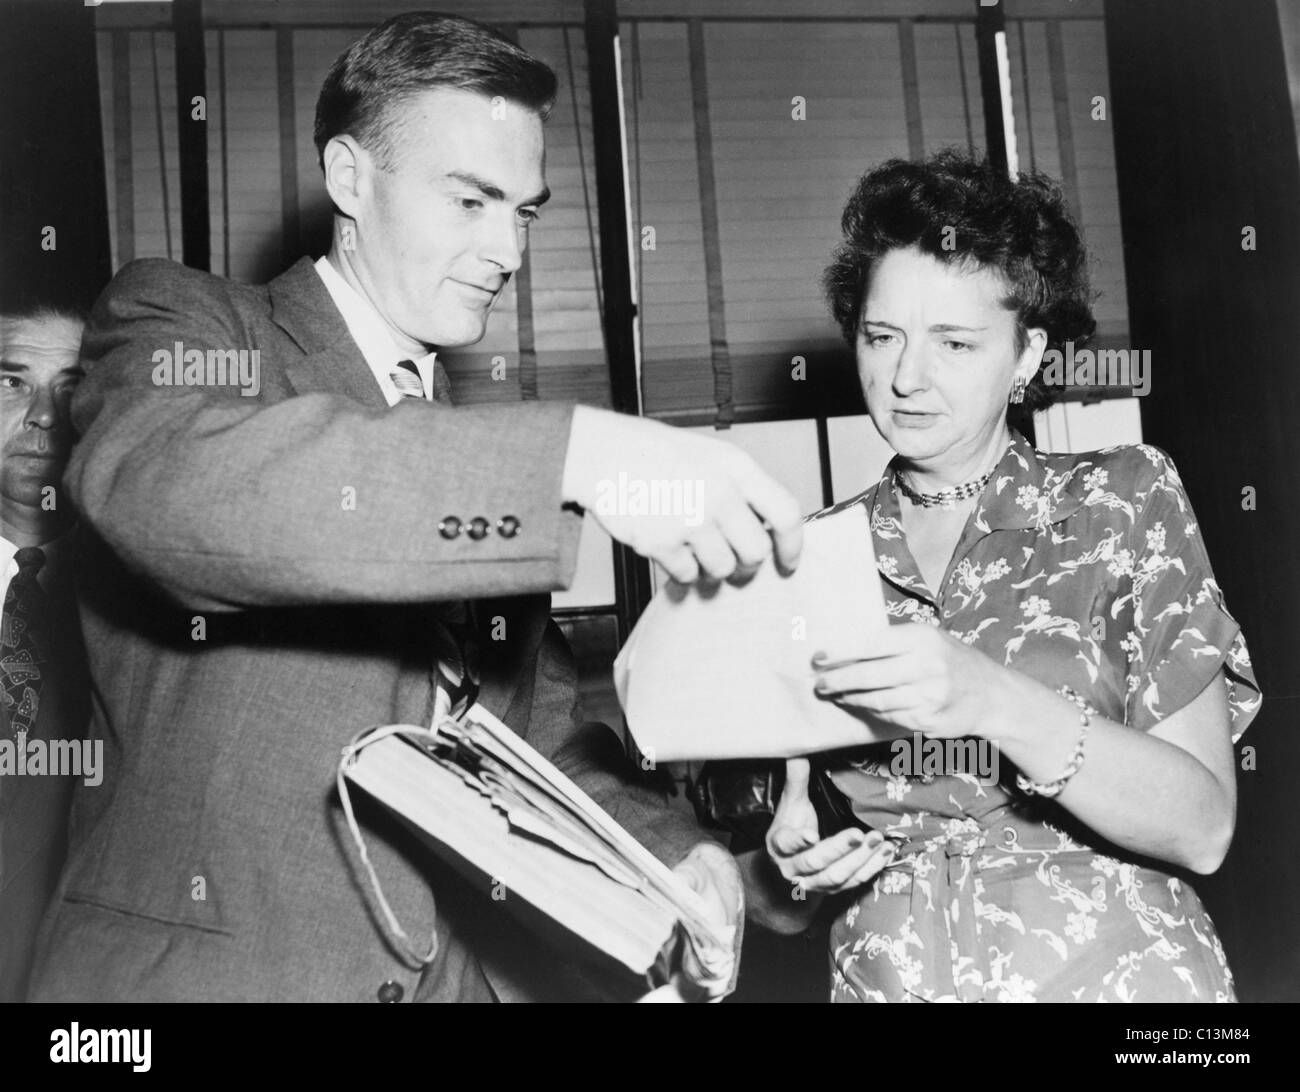 William Remington left U.S. Government economist accused of spying for the Soviet Union during World War II with his accuser Elizabeth T. Bentley in 1948. Remington was convicted of perjury and murdered while in prison. Stock Photo